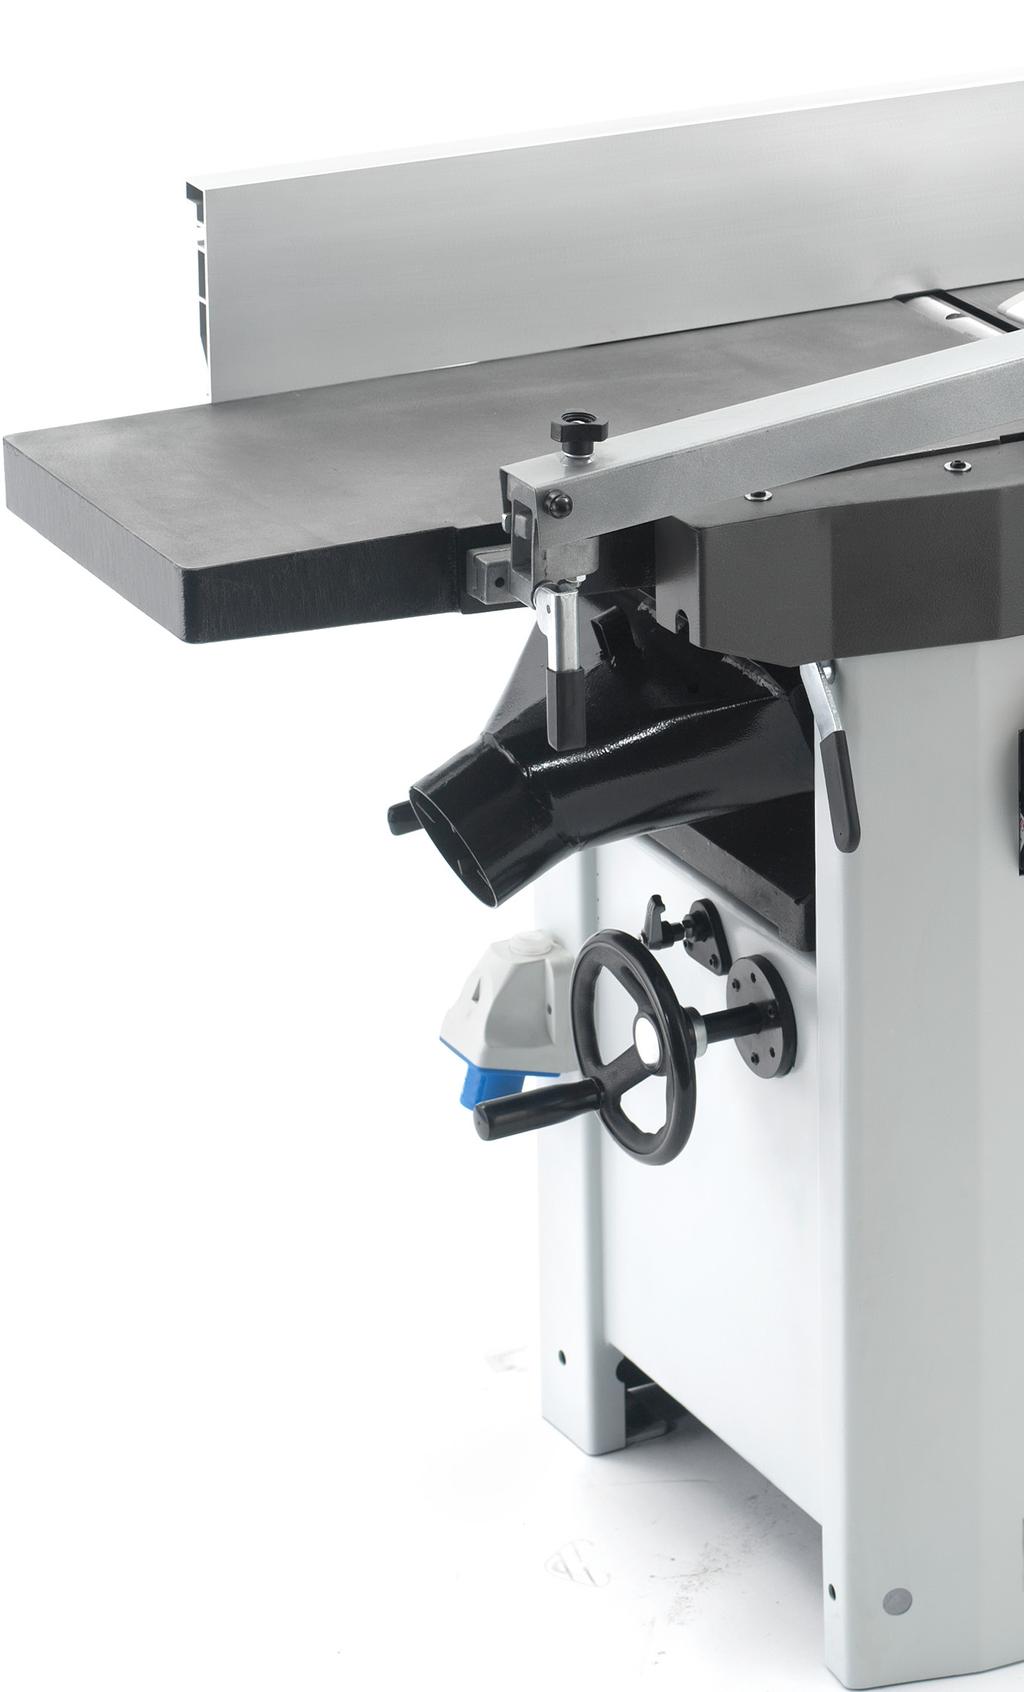 One of the key features of the SD31 is its parallel table lift design.